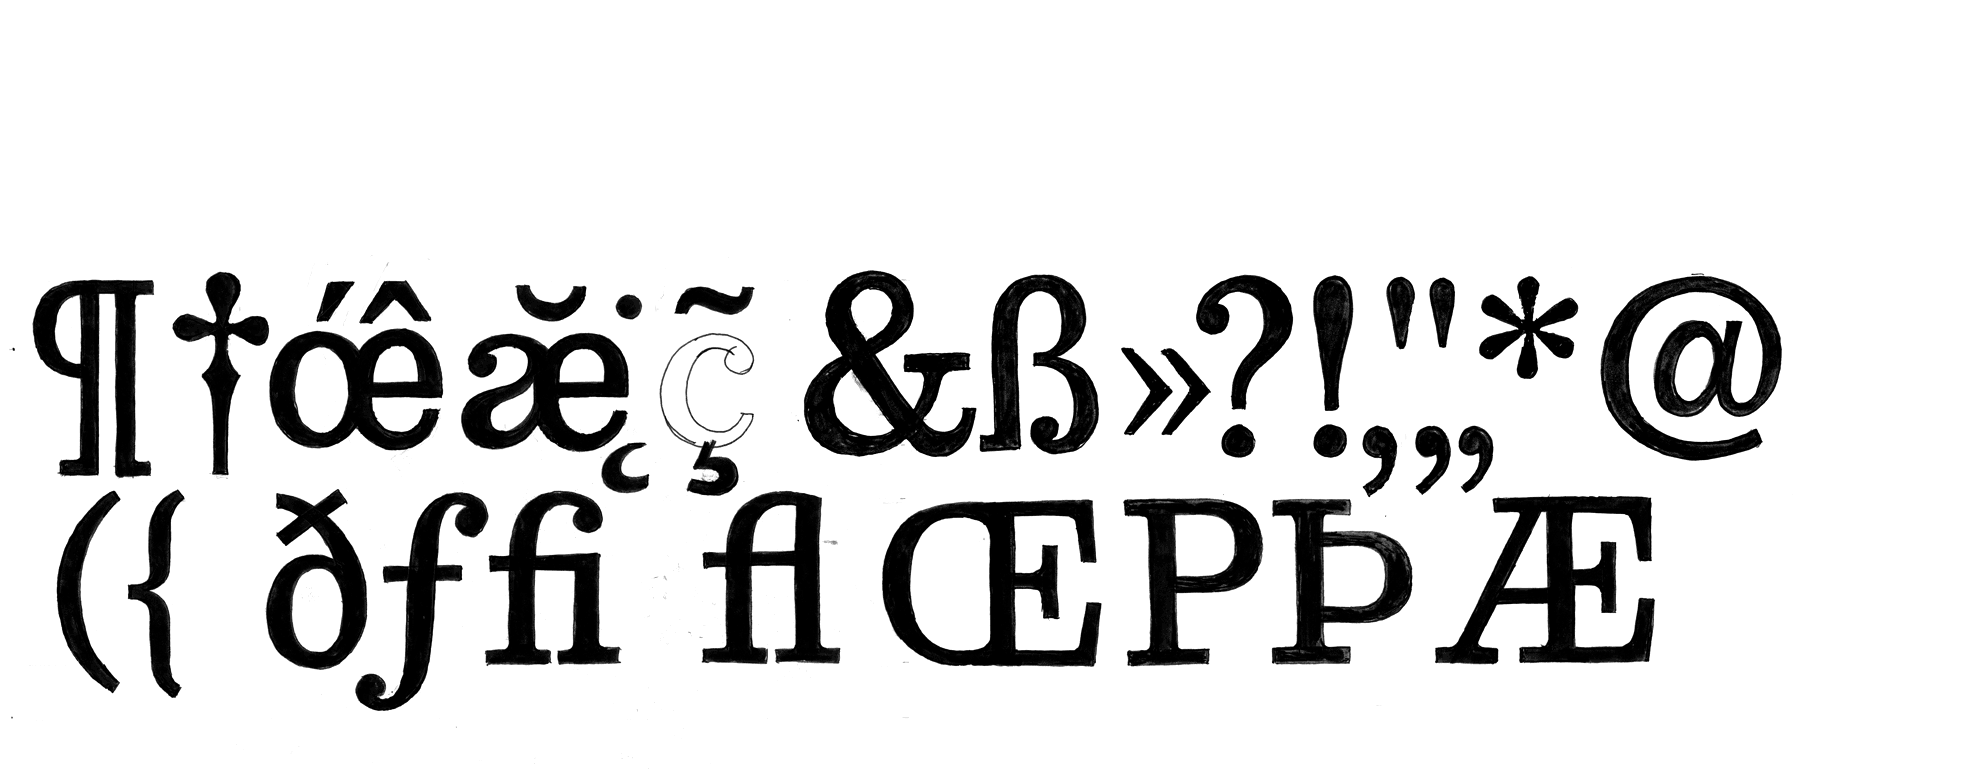 Manual sketches for diacritics and other stuff